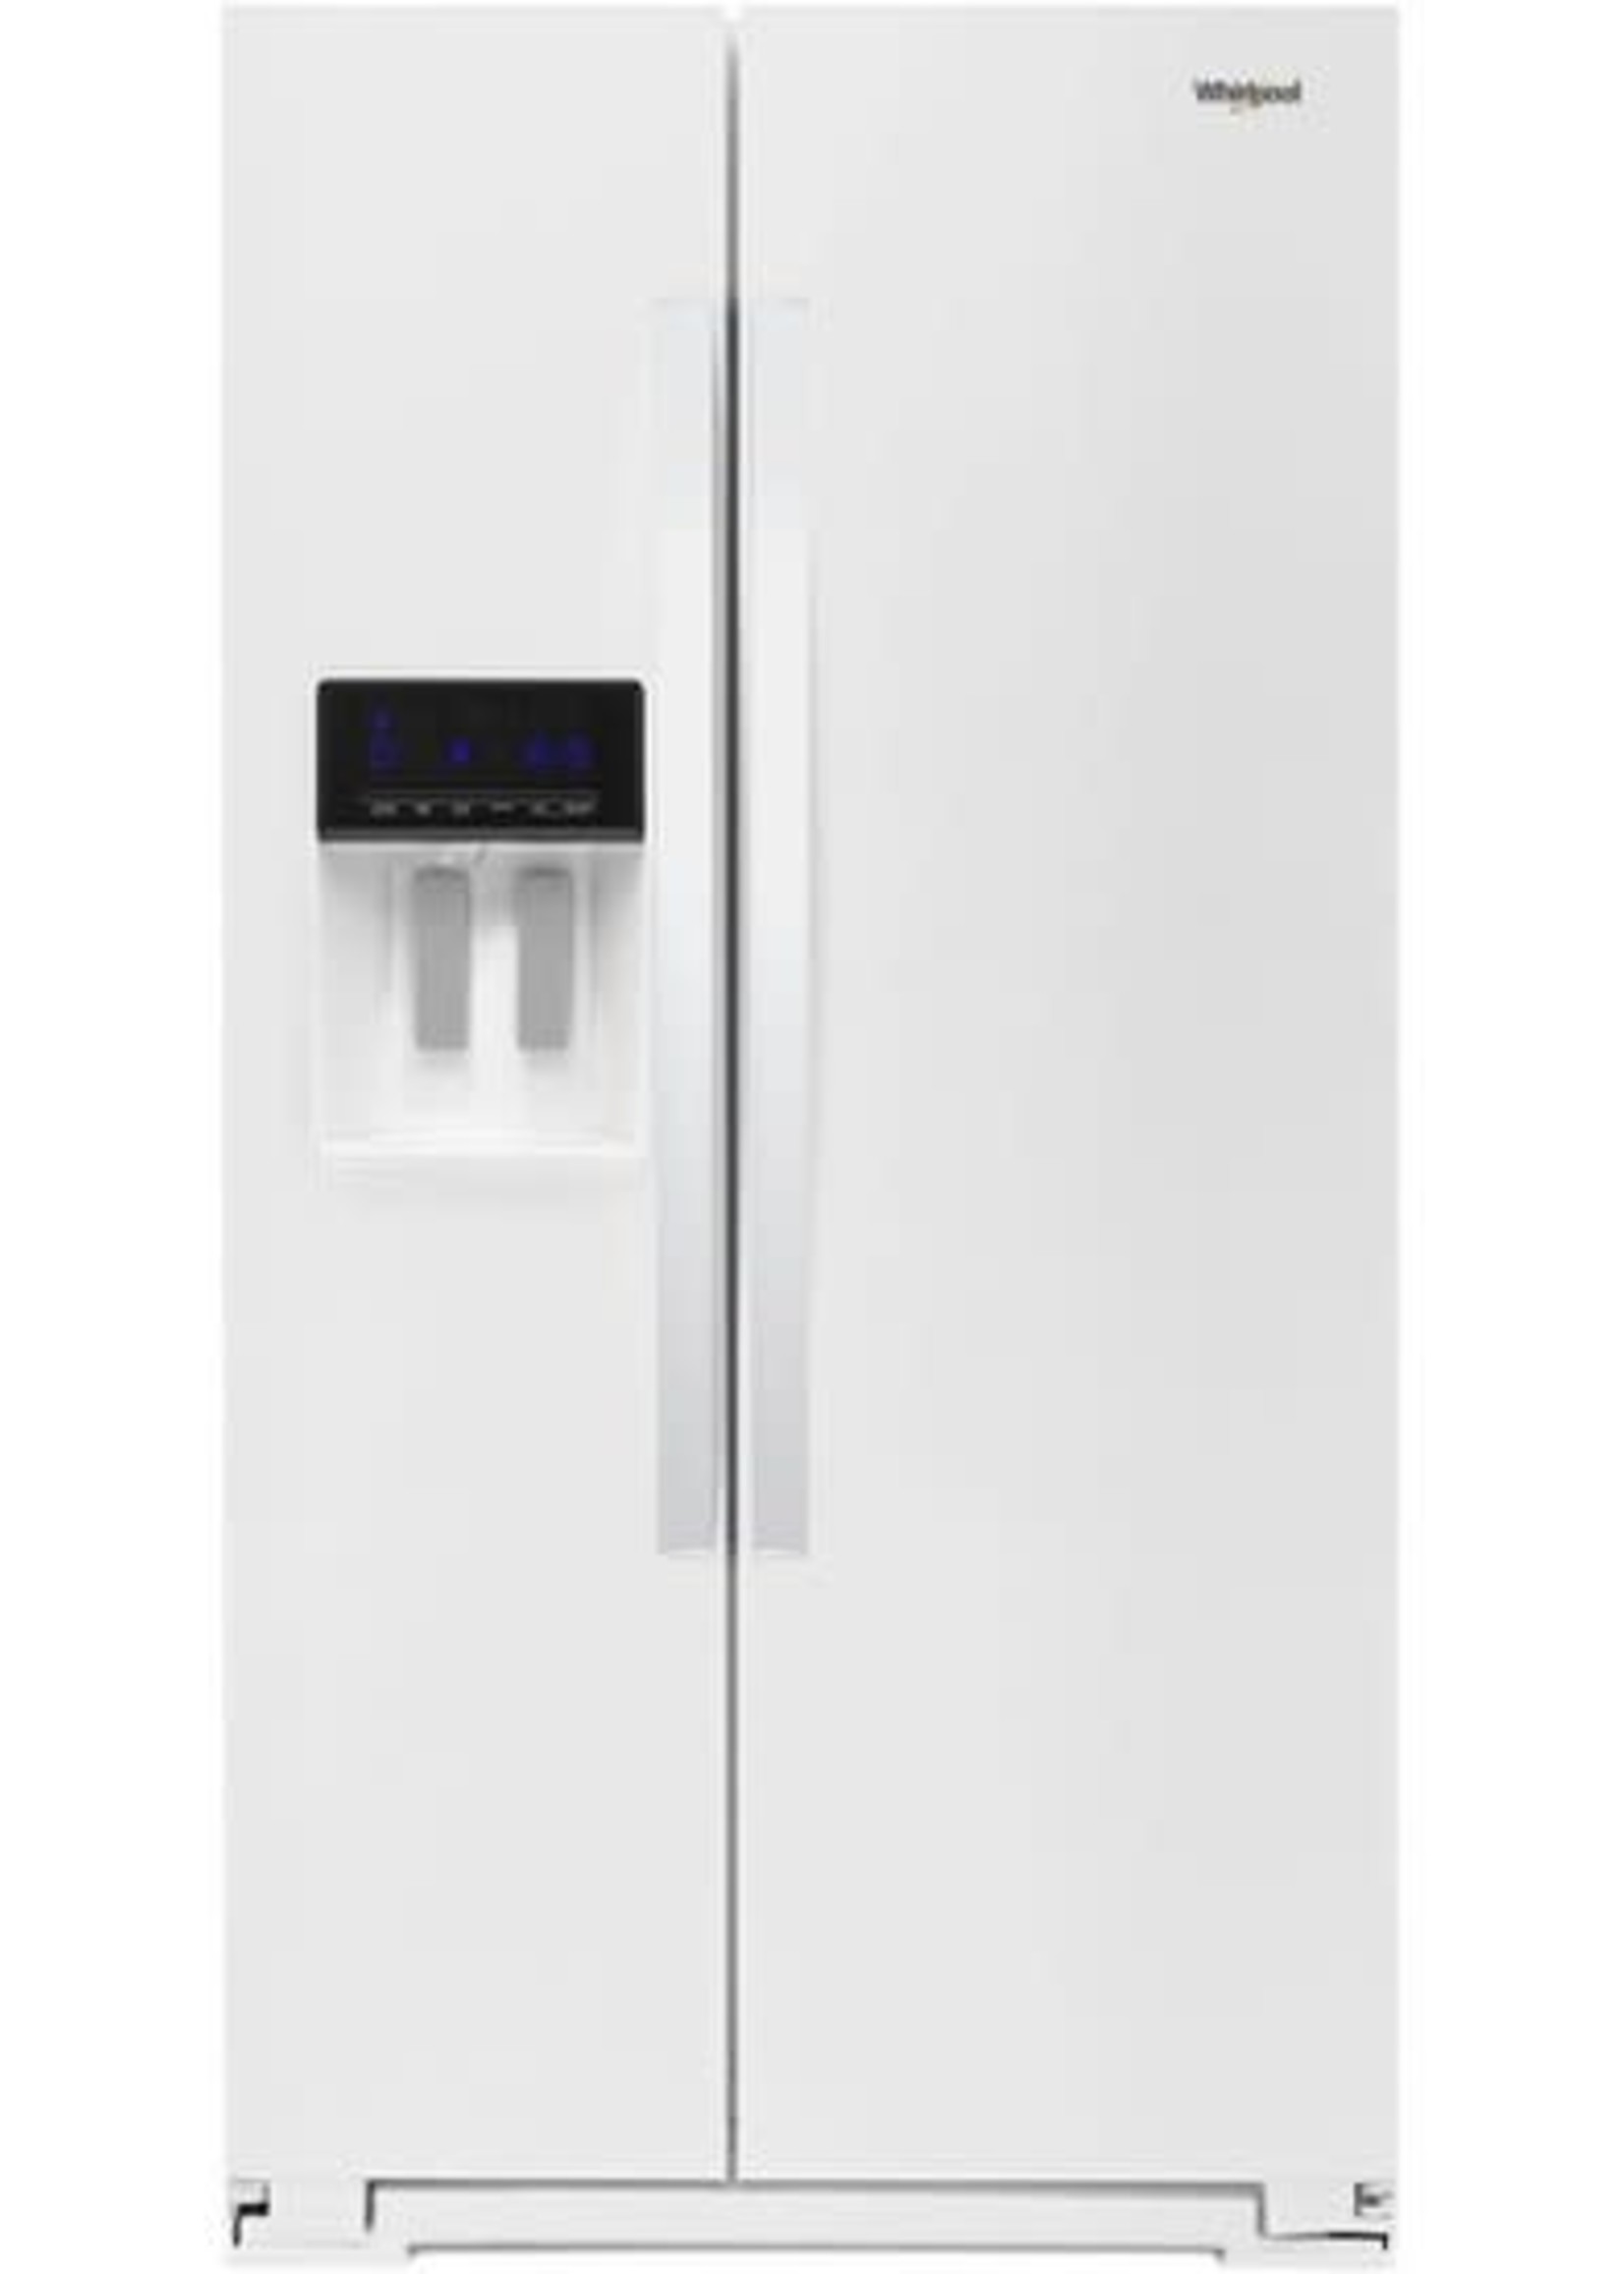 Whirlpool *Whirlpool   WRS571CIHW 20.6 Cu. Ft. Side-by-Side Counter-Depth Refrigerator - White